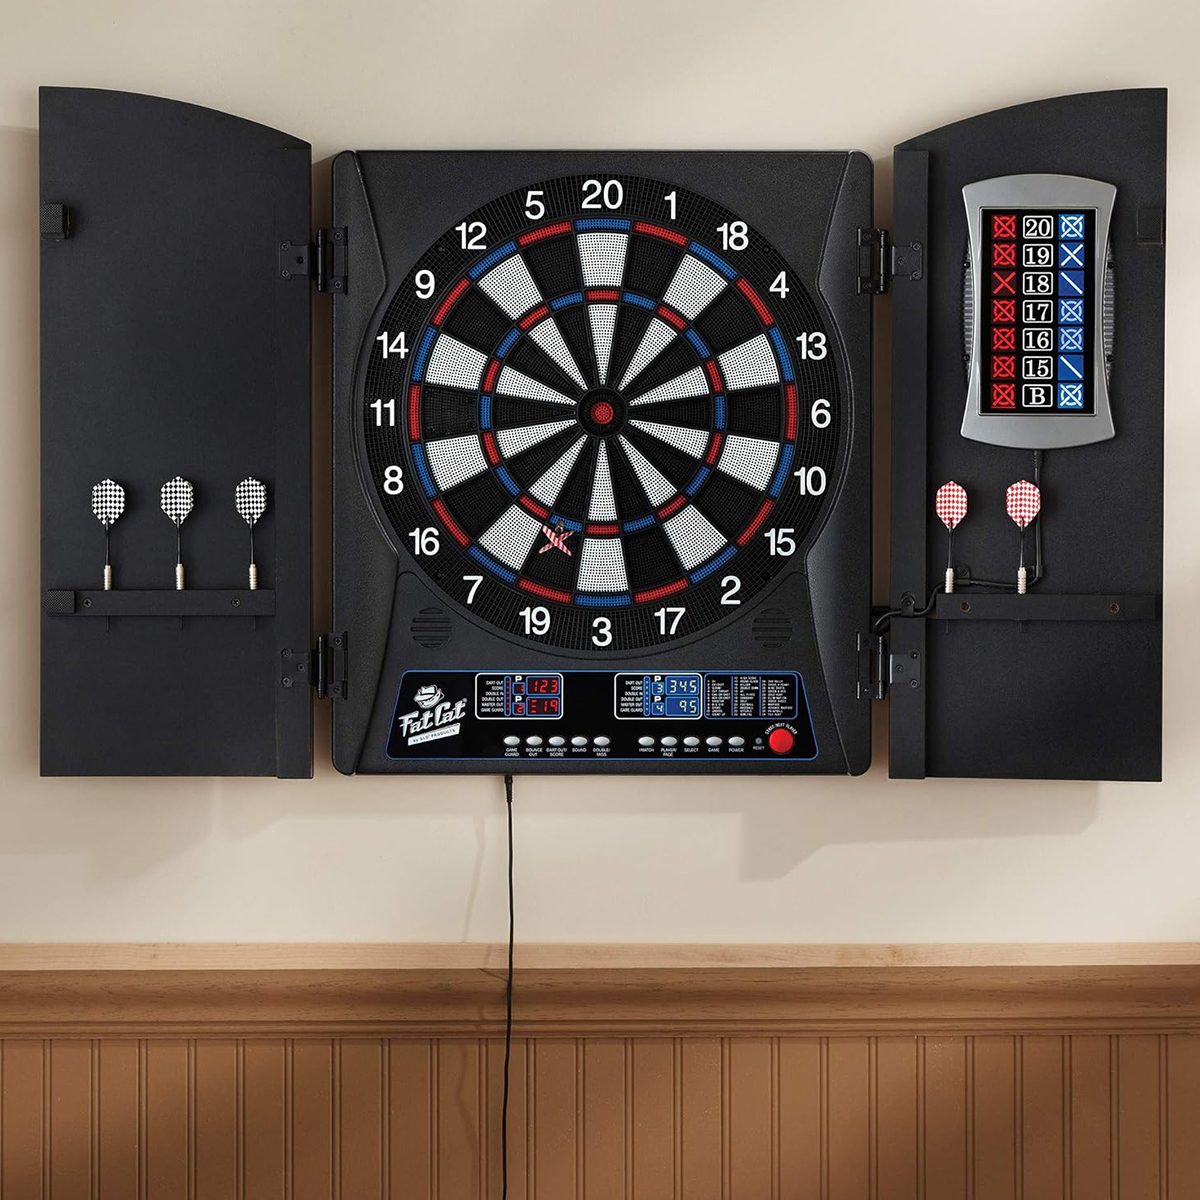 6 Tips to Maintain Your Dartboard to Make It Last Longer